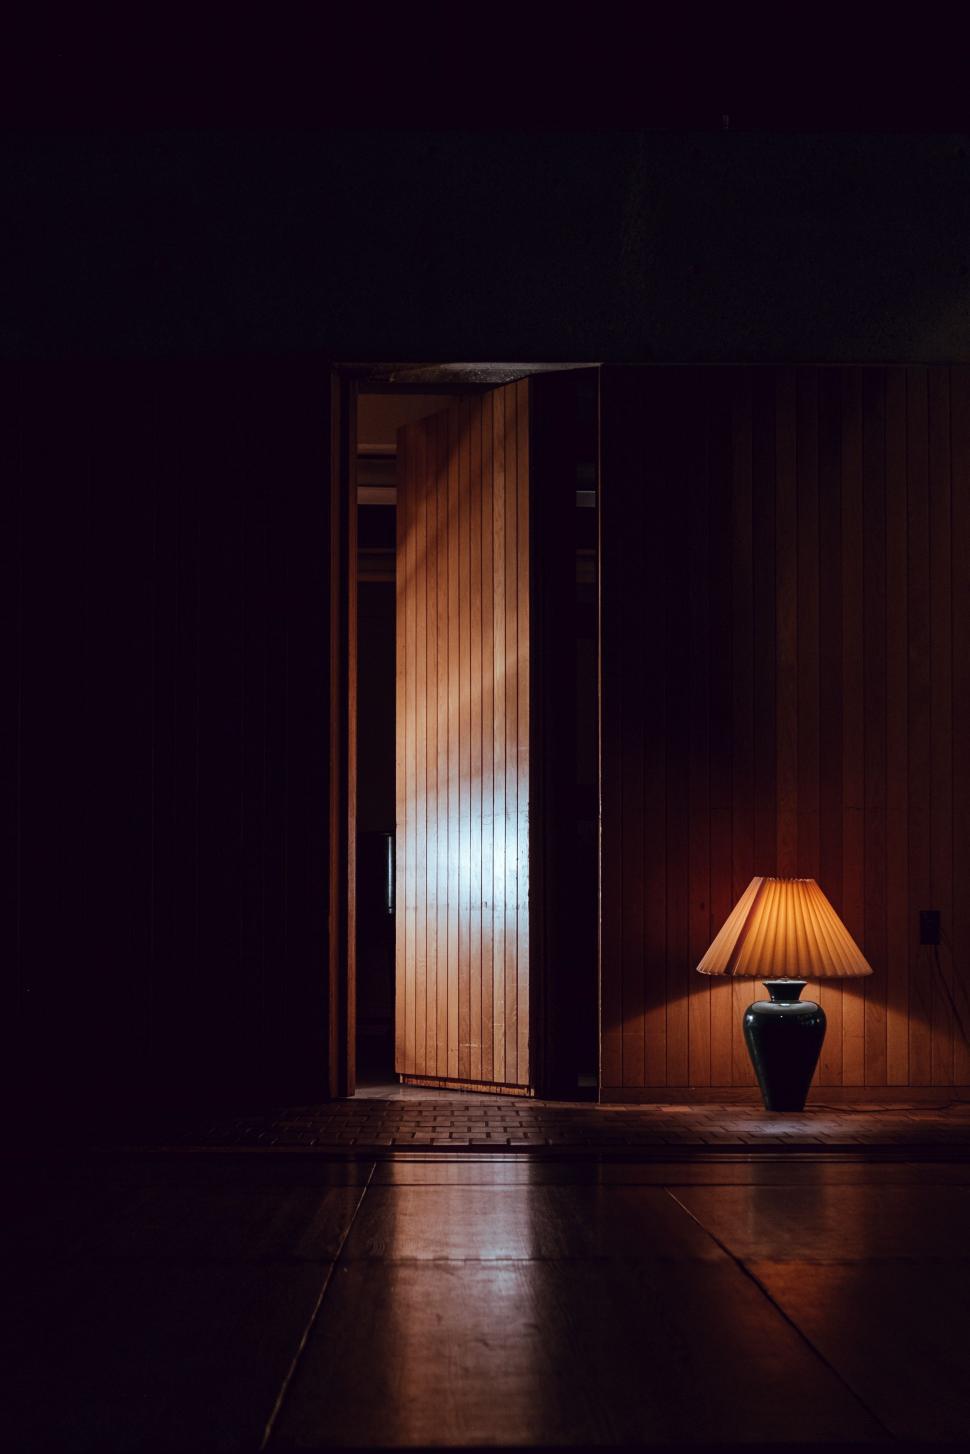 Free Image of Lamp on Table Next to Doorway 